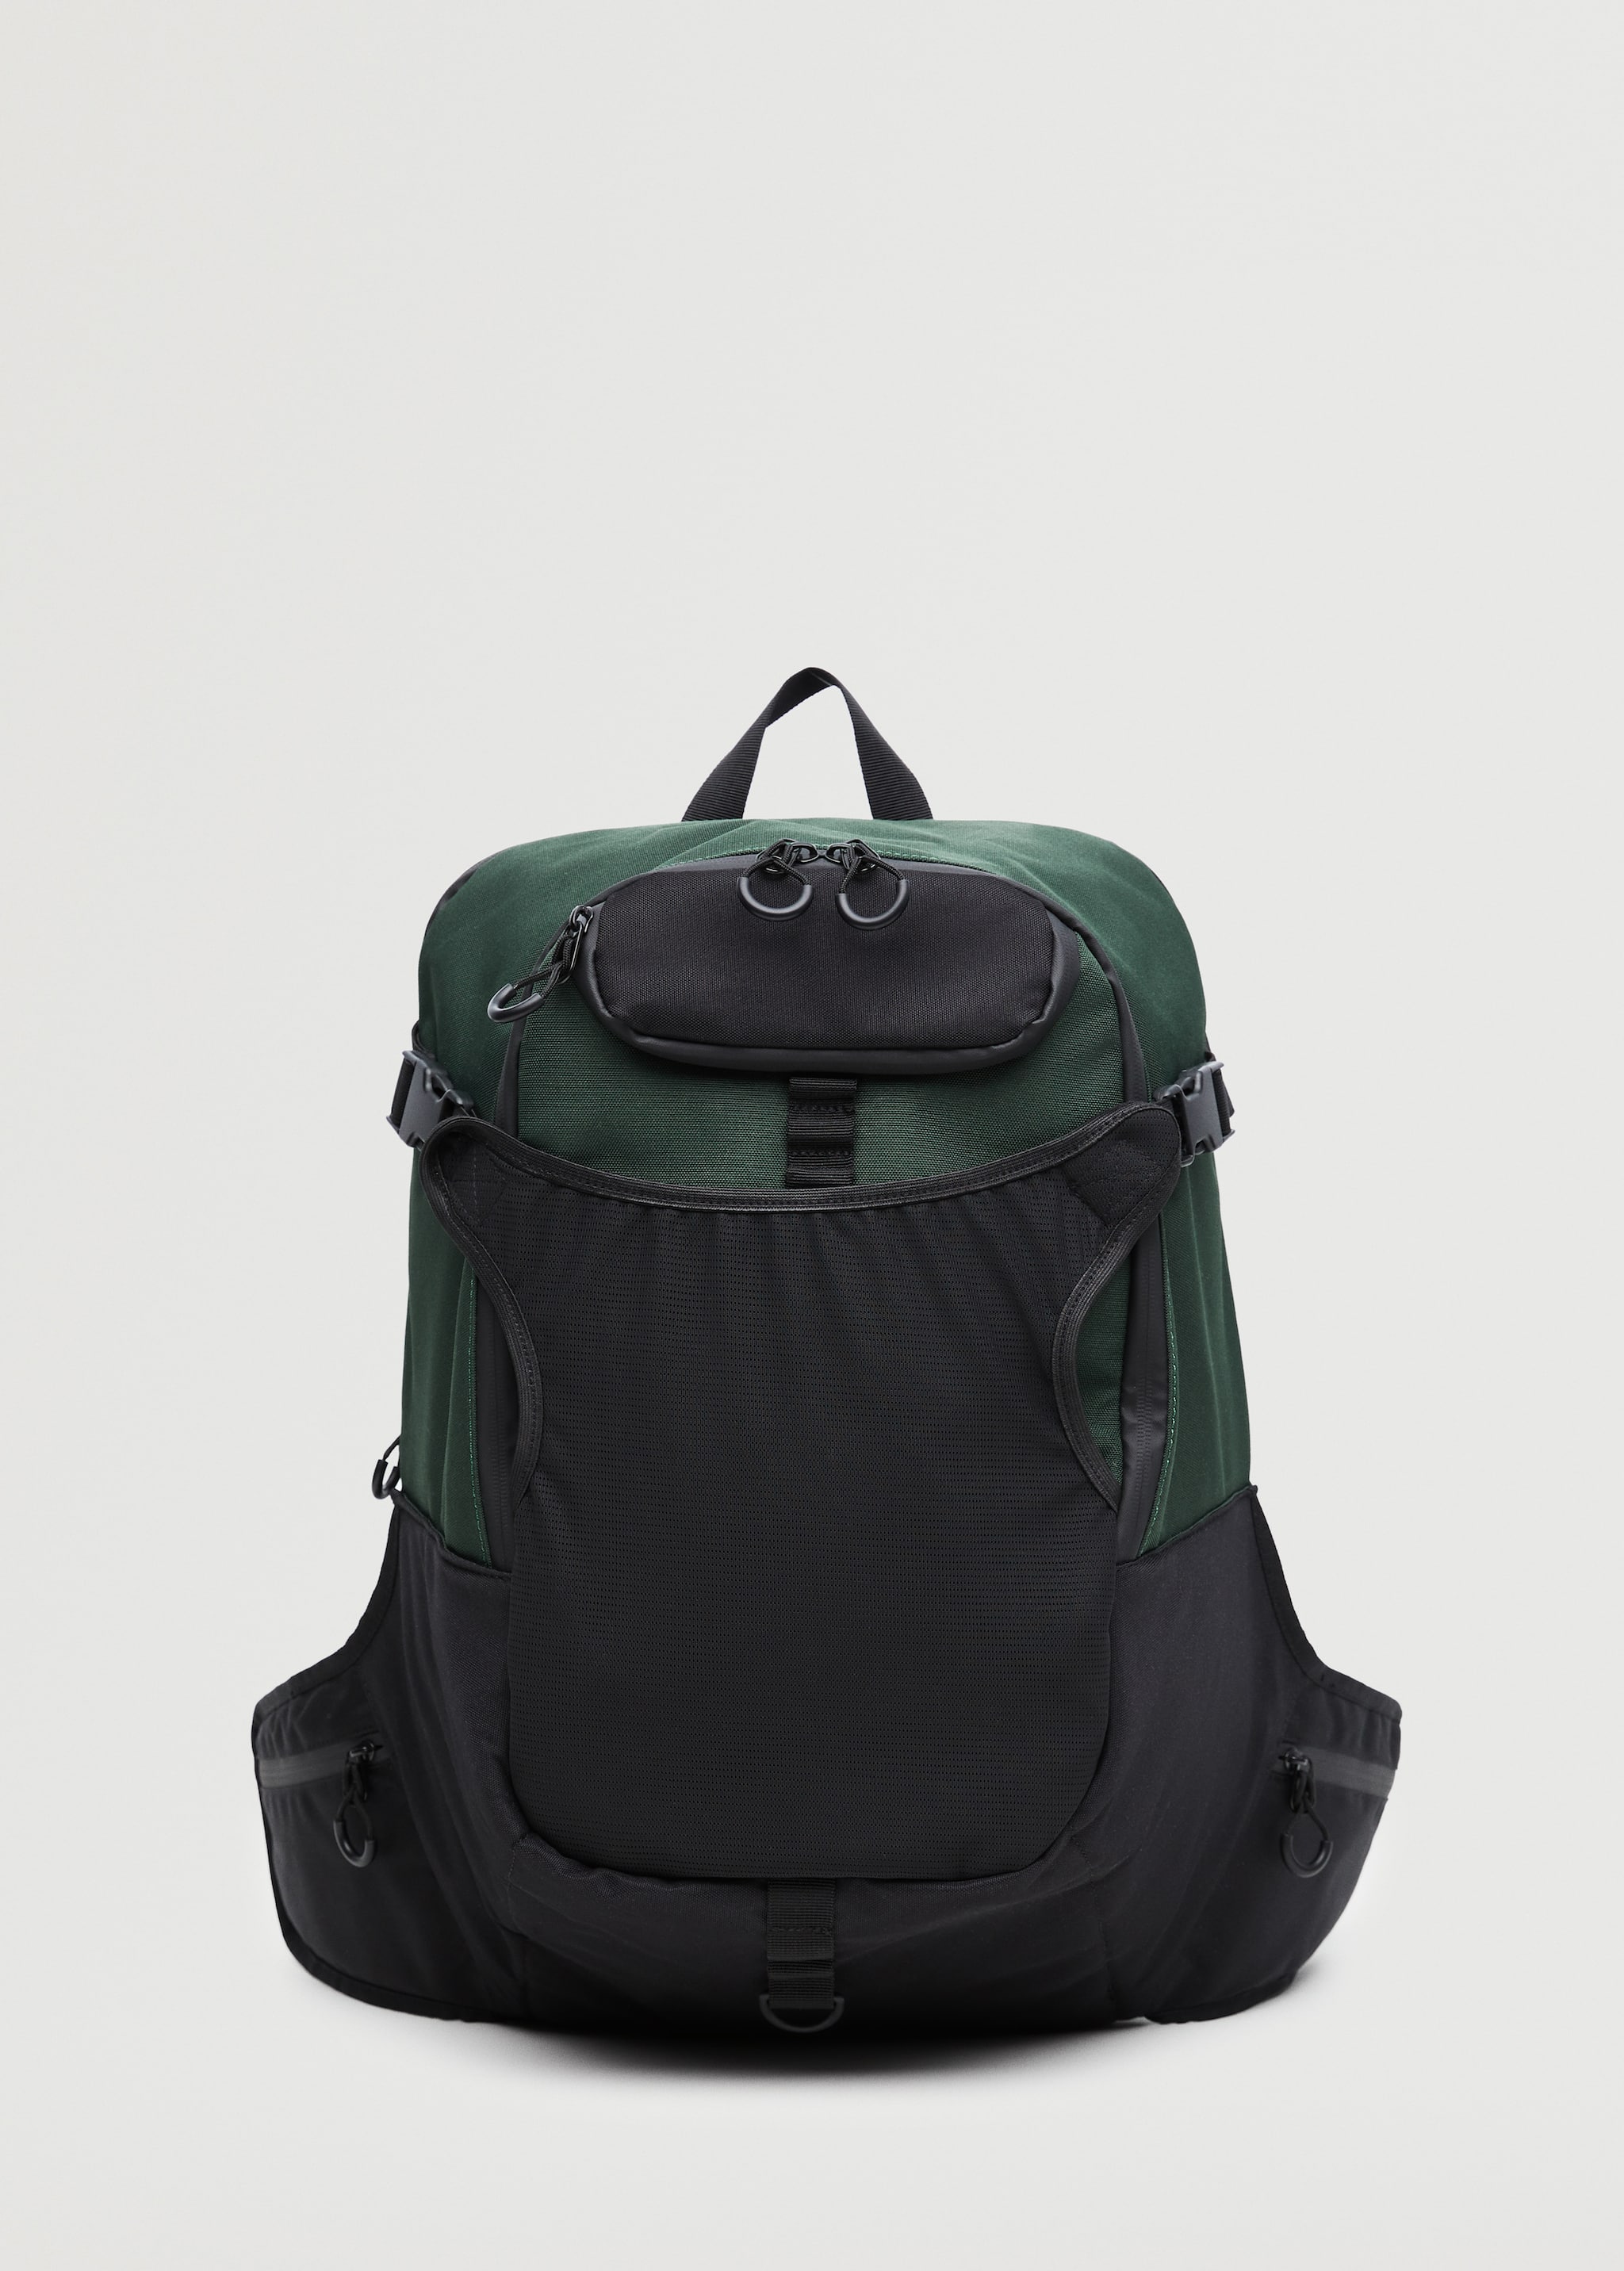 Multifunctional contrasting backpack - Article without model